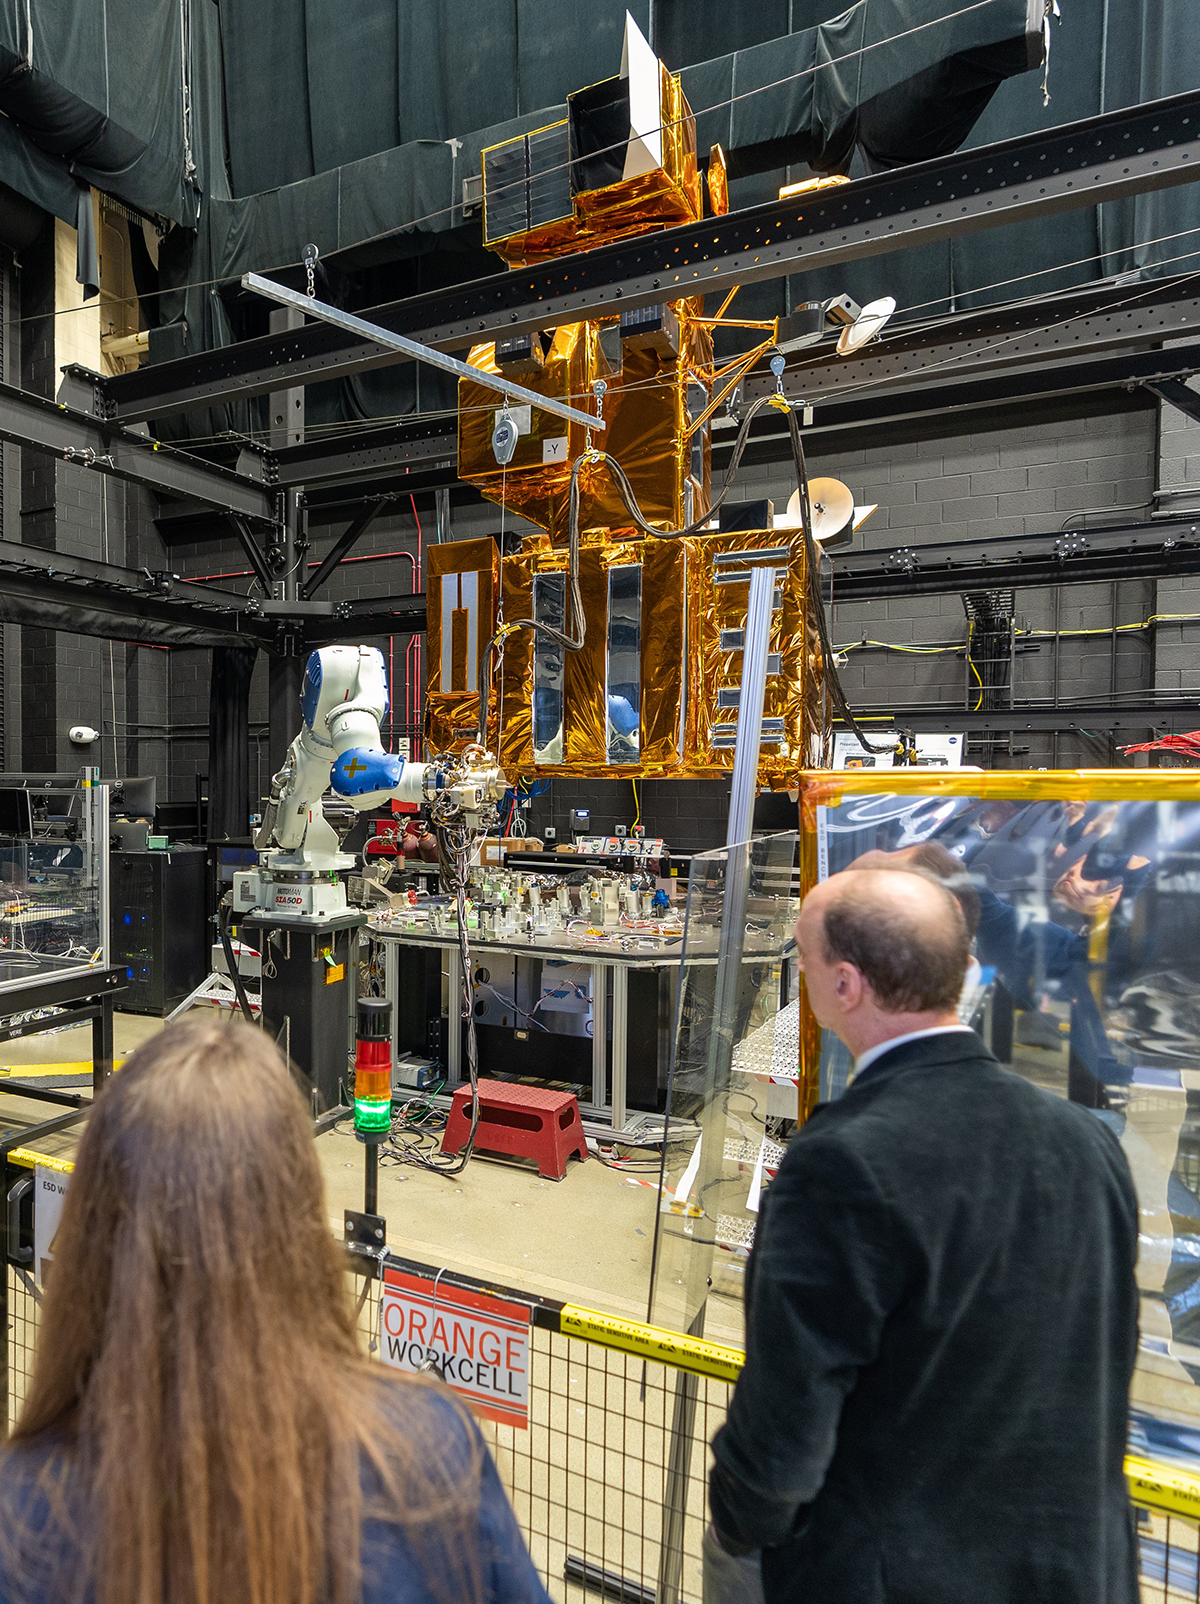 Robotic Operations Center (ROC) at NASA Goddard Space Flight Center showing full scale mock-up of Landsat 7 with OSAM-1 payload deck.